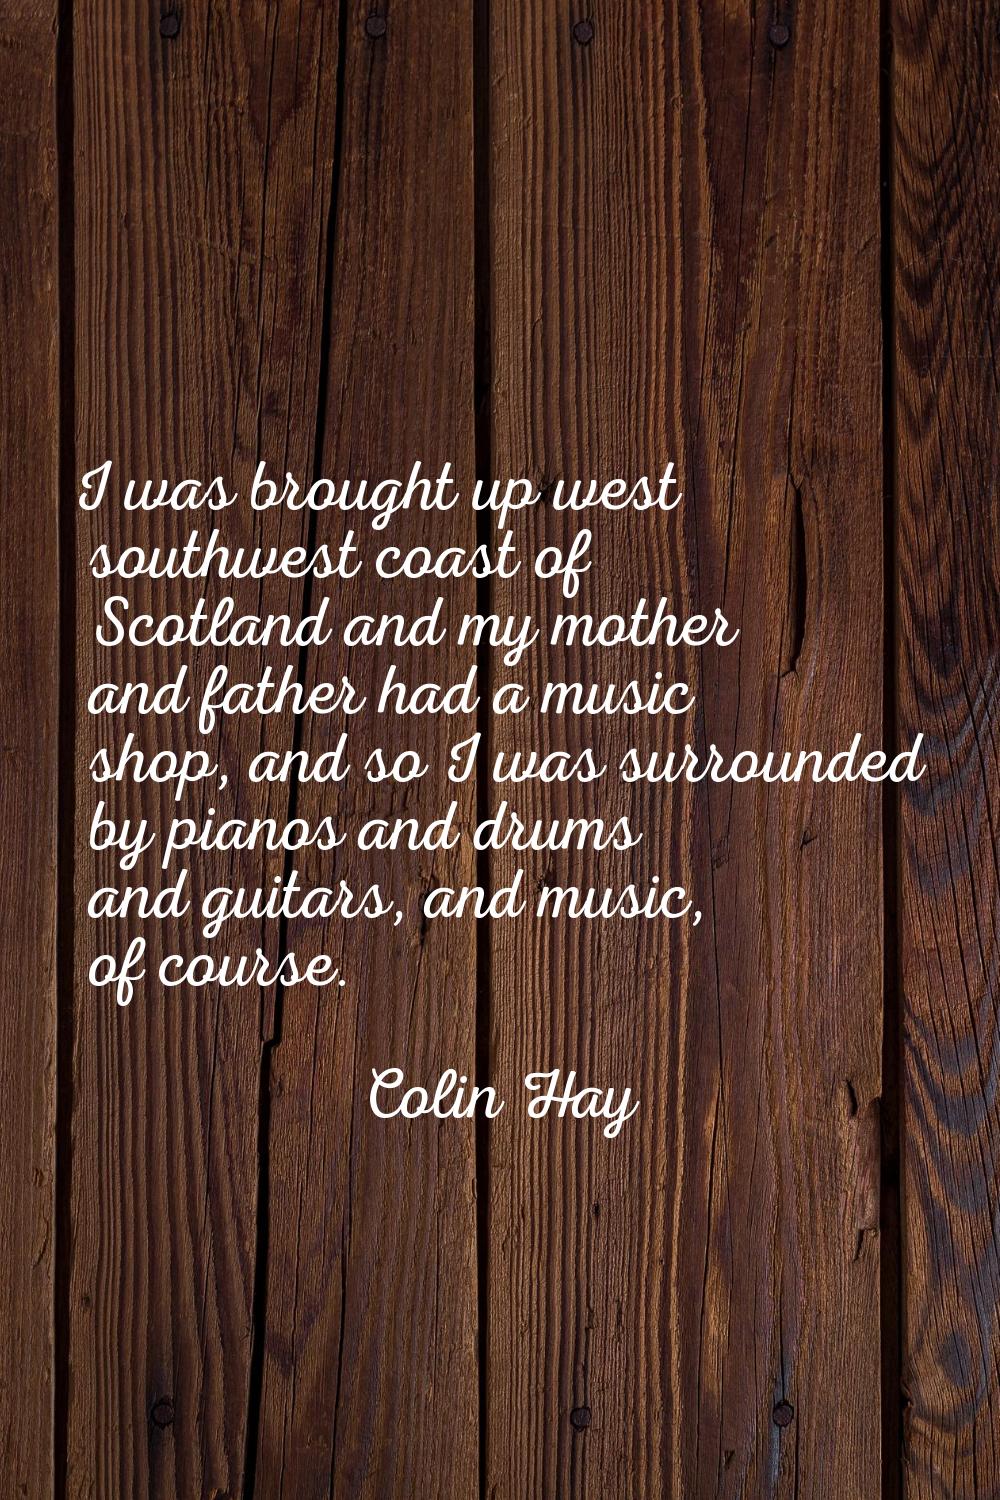 I was brought up west southwest coast of Scotland and my mother and father had a music shop, and so